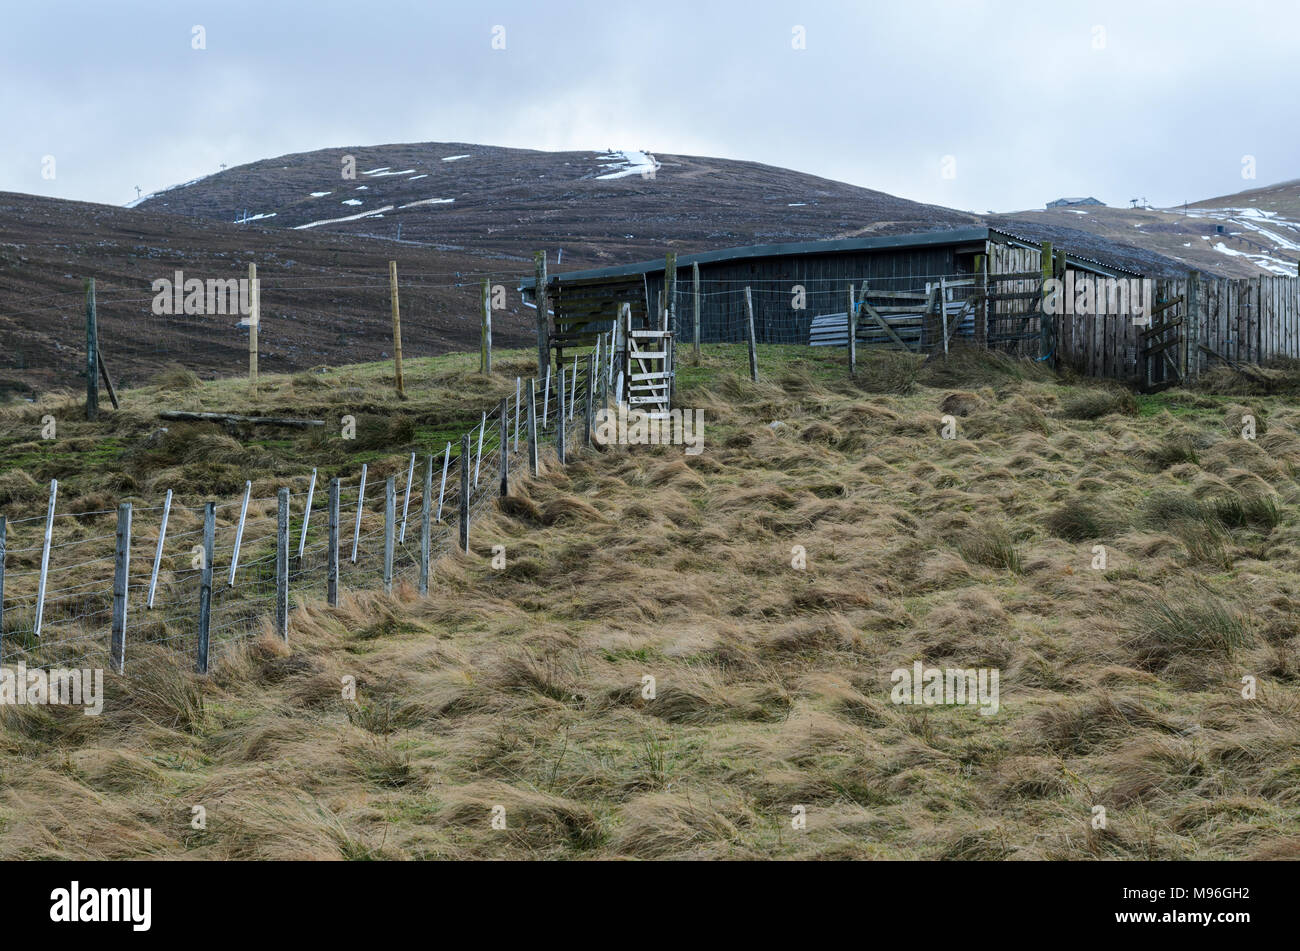 Reindeer Paddock and Shelter on the slopes of the Cairngorm Mountain in the Scottish Highlands Stock Photo